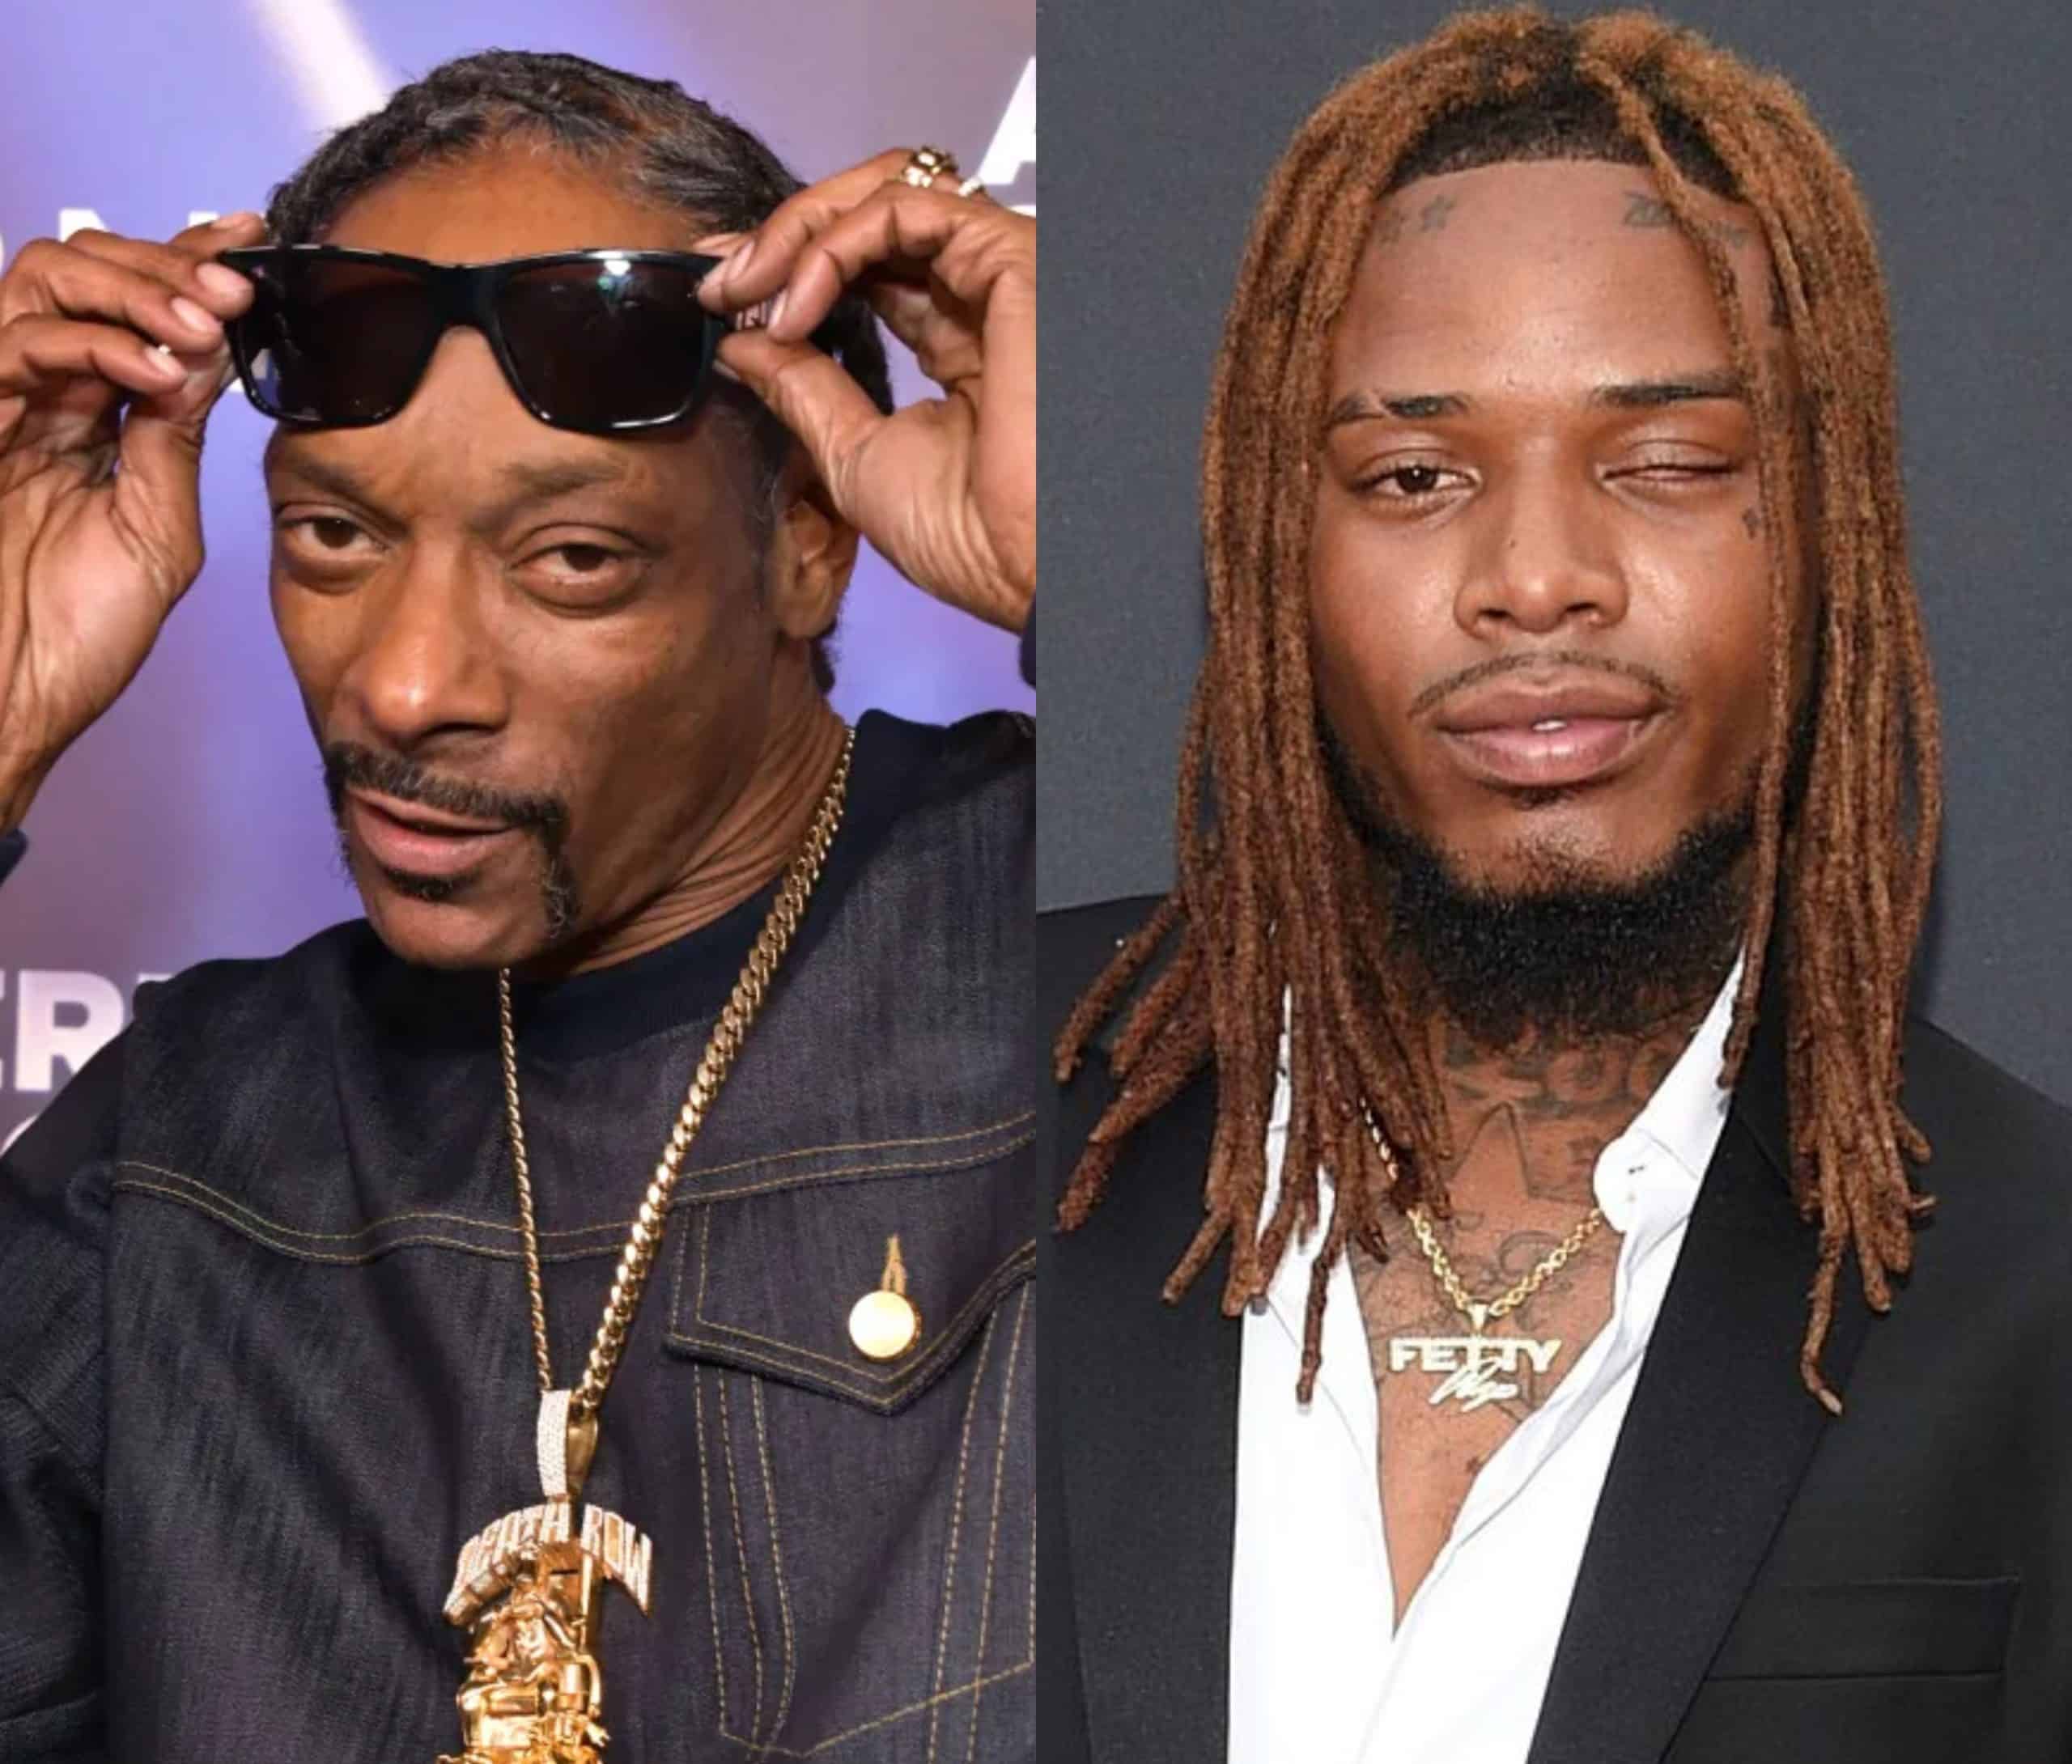 Snoop Dogg Calls Fetty Wap's Sweet Yamz Song Of The Year